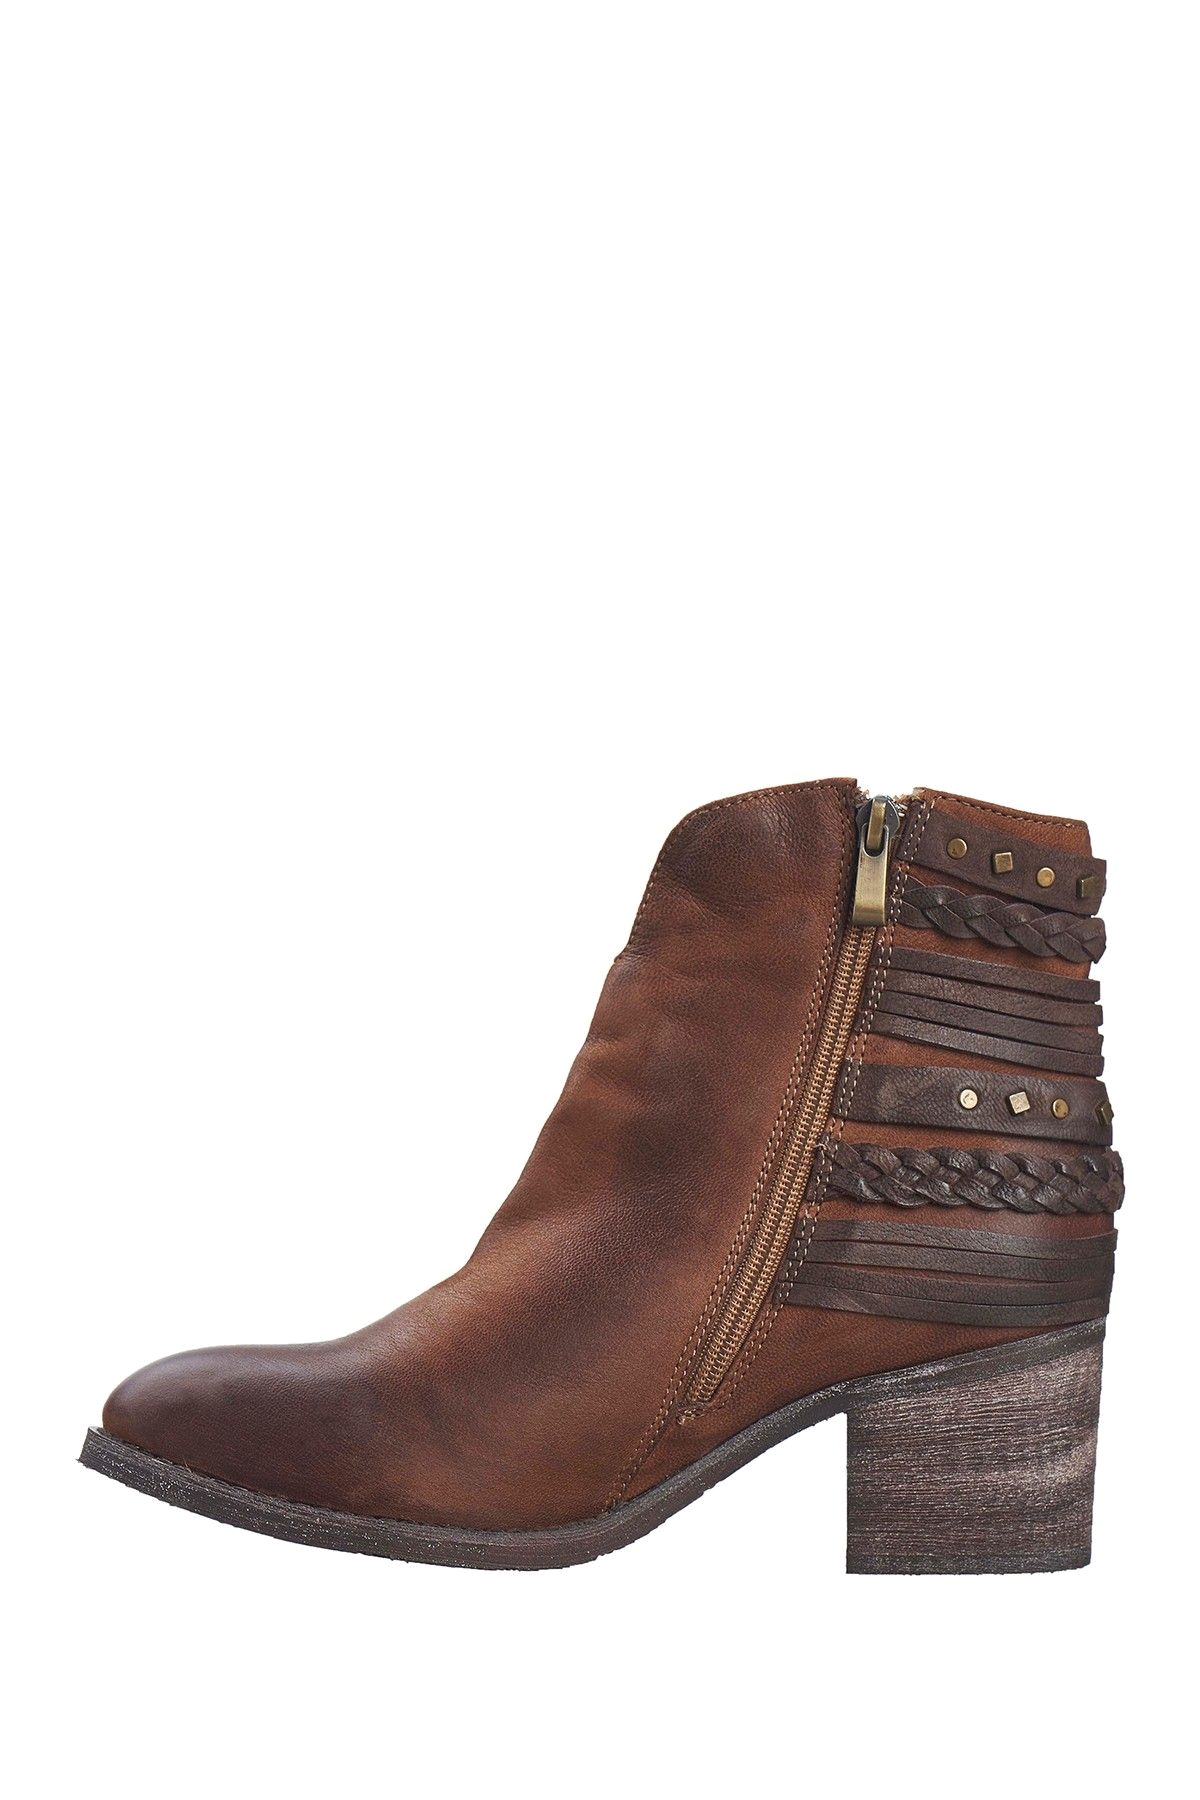 ankle boots nordstrom rack